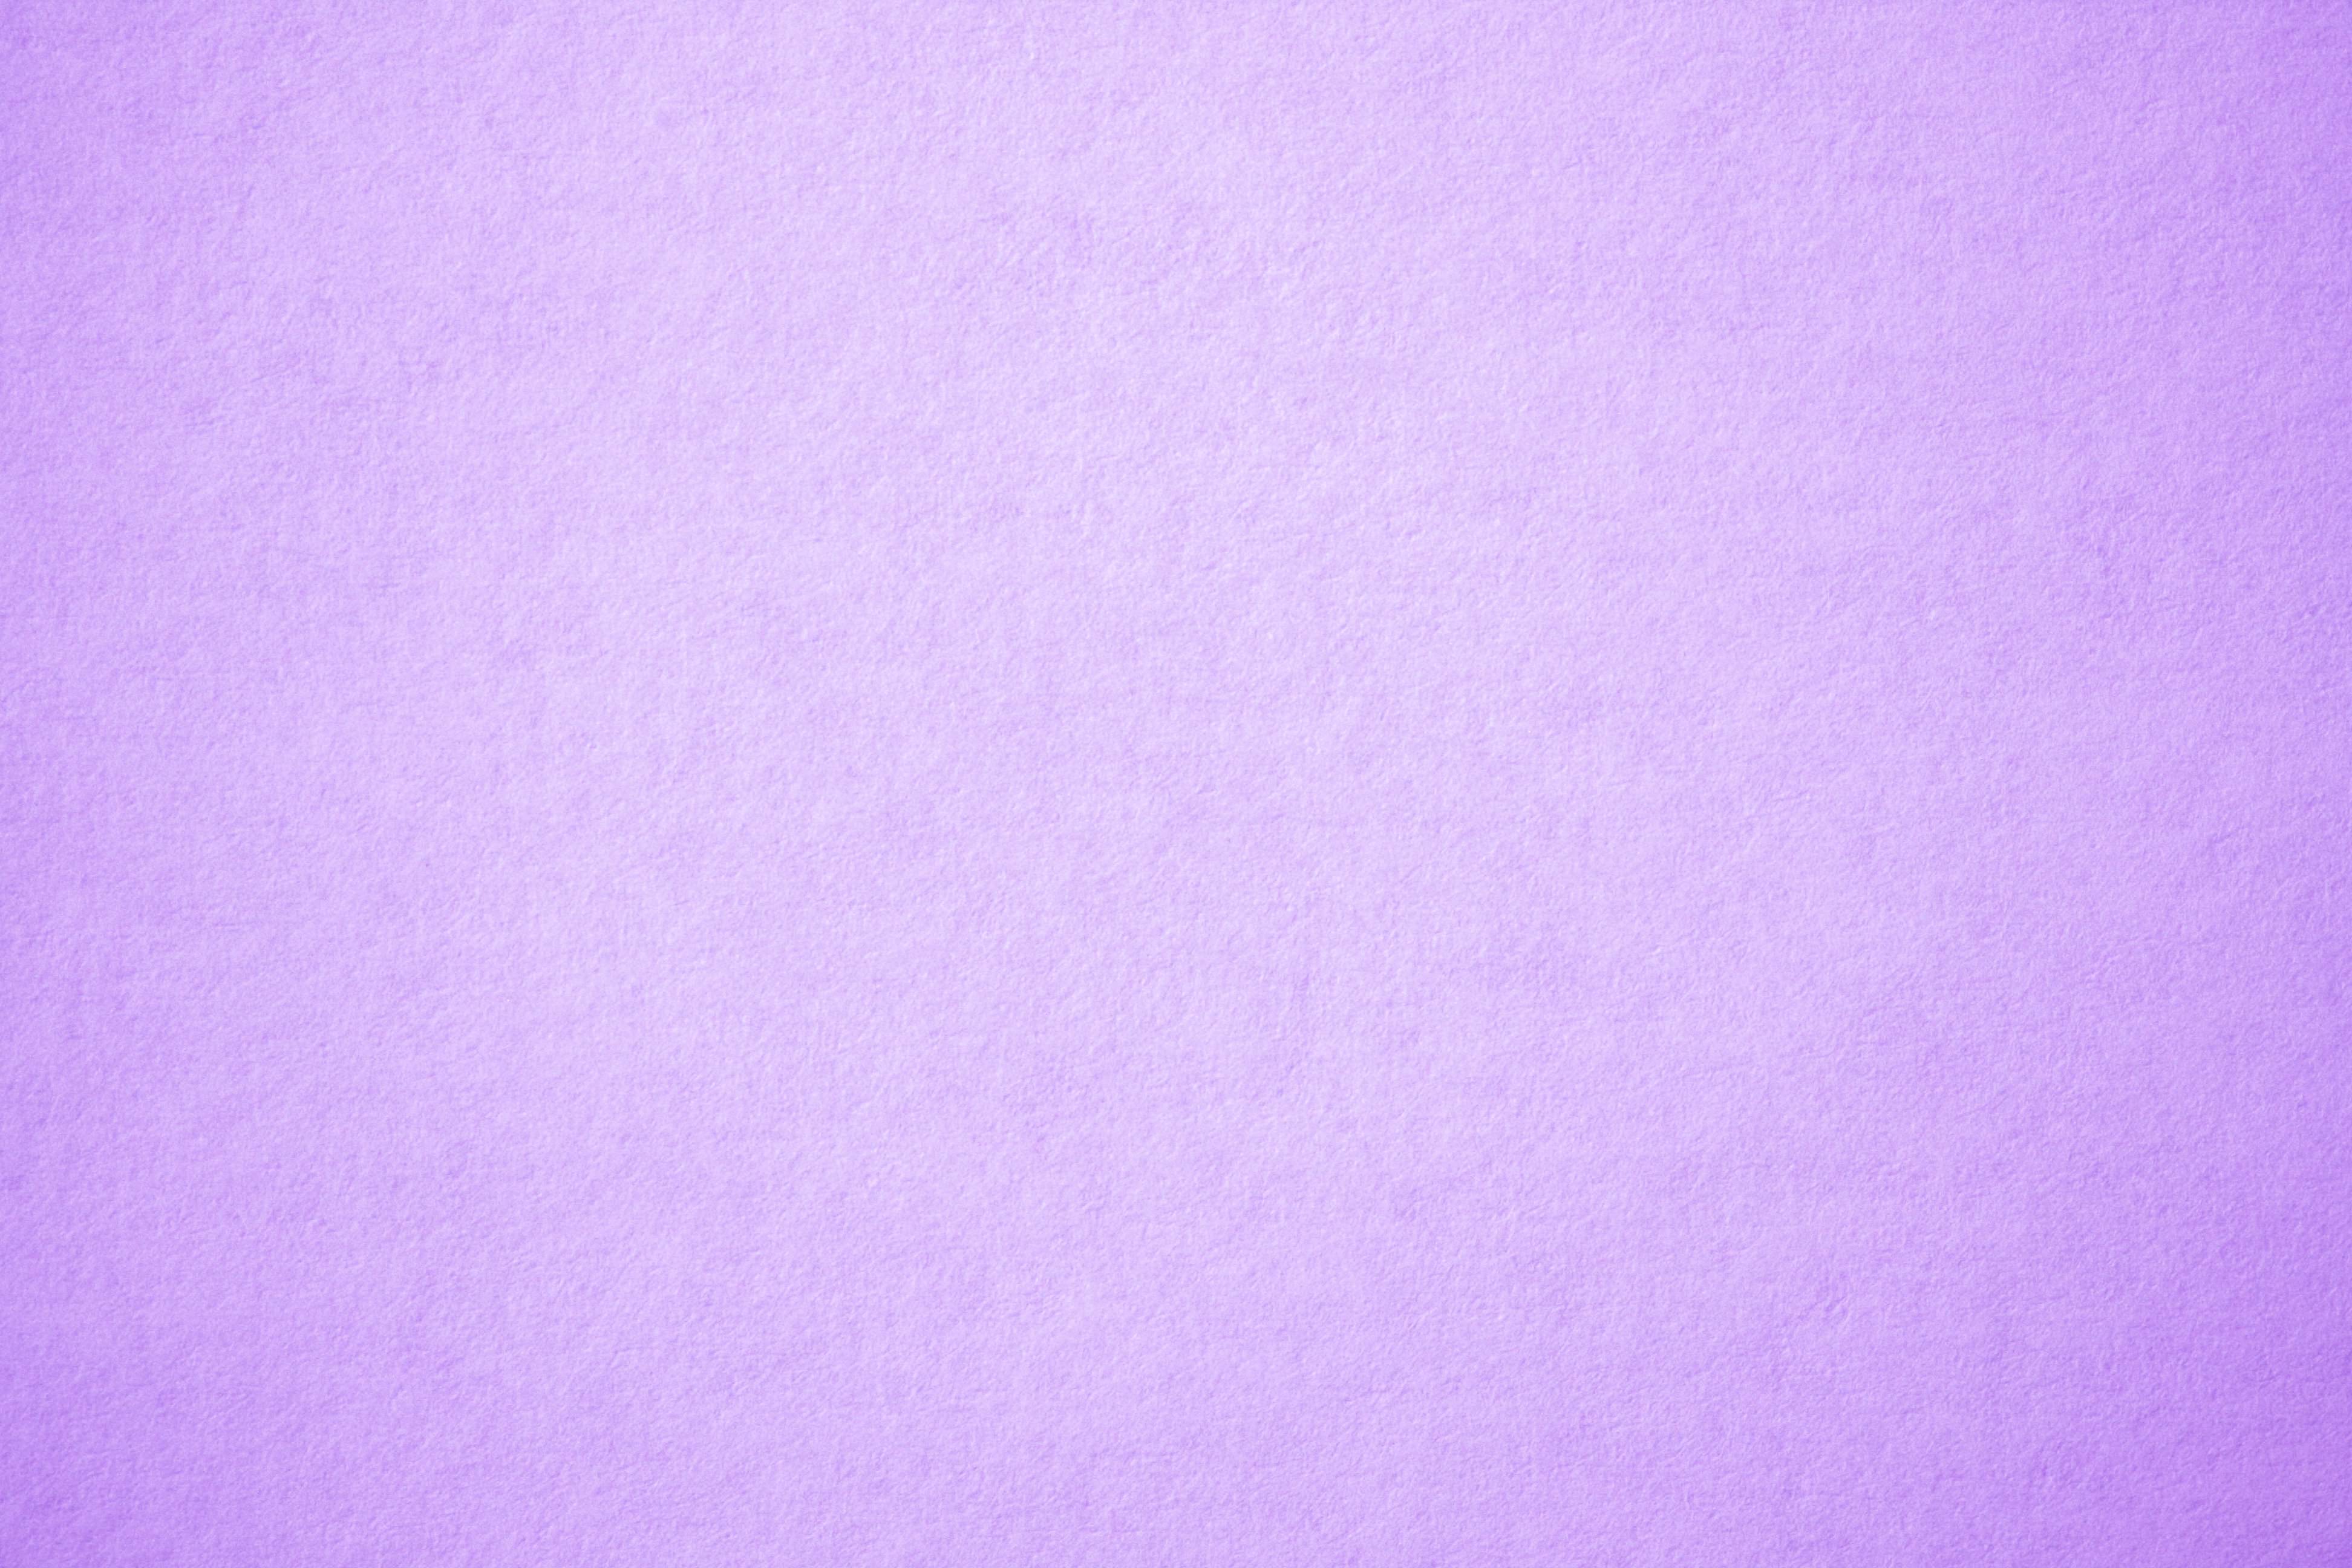 Plain Background Images For Photoshop Free Download